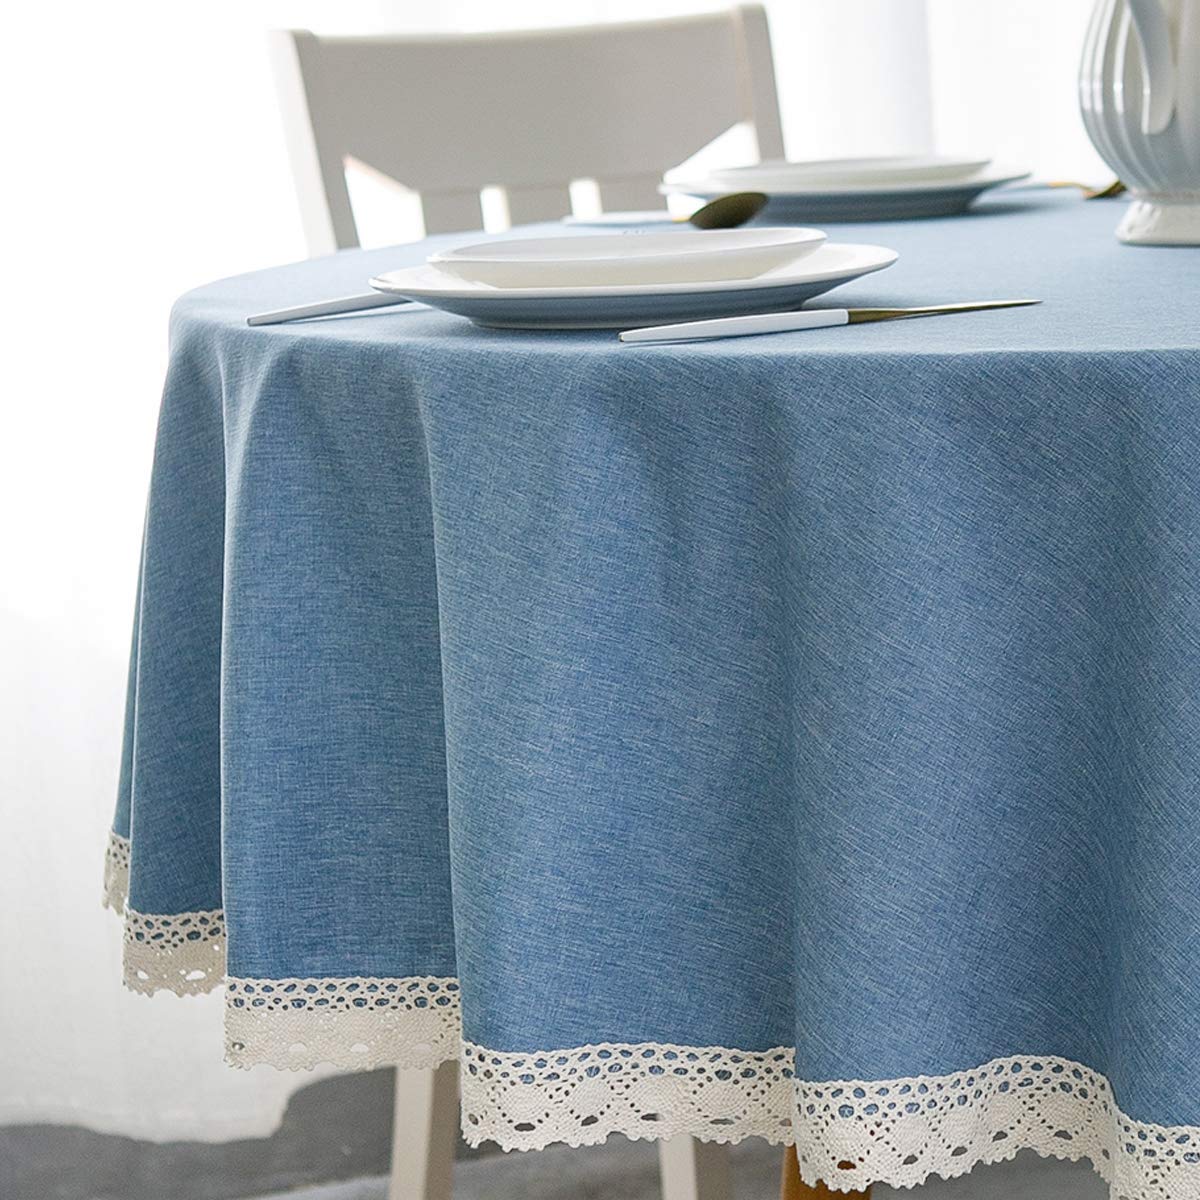 EHouseHome Faux Linen Tablecloth with Lace Trim - WaterproofSpill ProofStain ResistantWrinkle FreeOil Proof - for Banquet, Parti